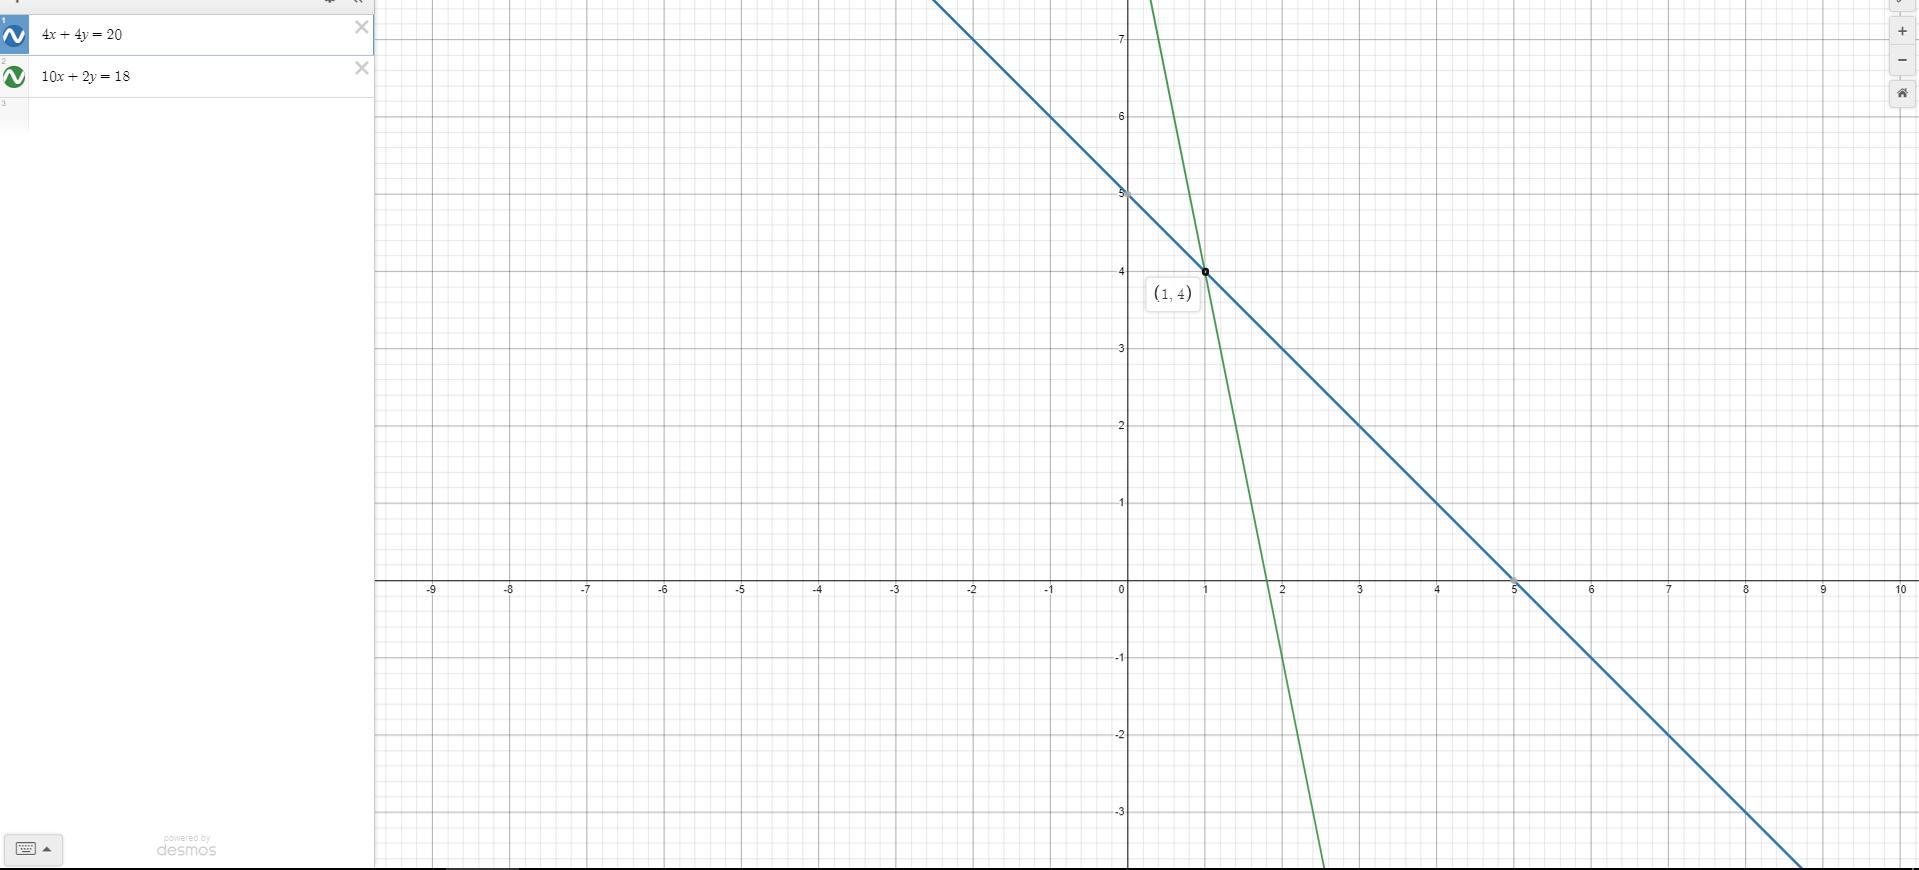 Solve The Following System Of Linear Equations By Graphing:4x + 4y = 2010x + 2y = 18